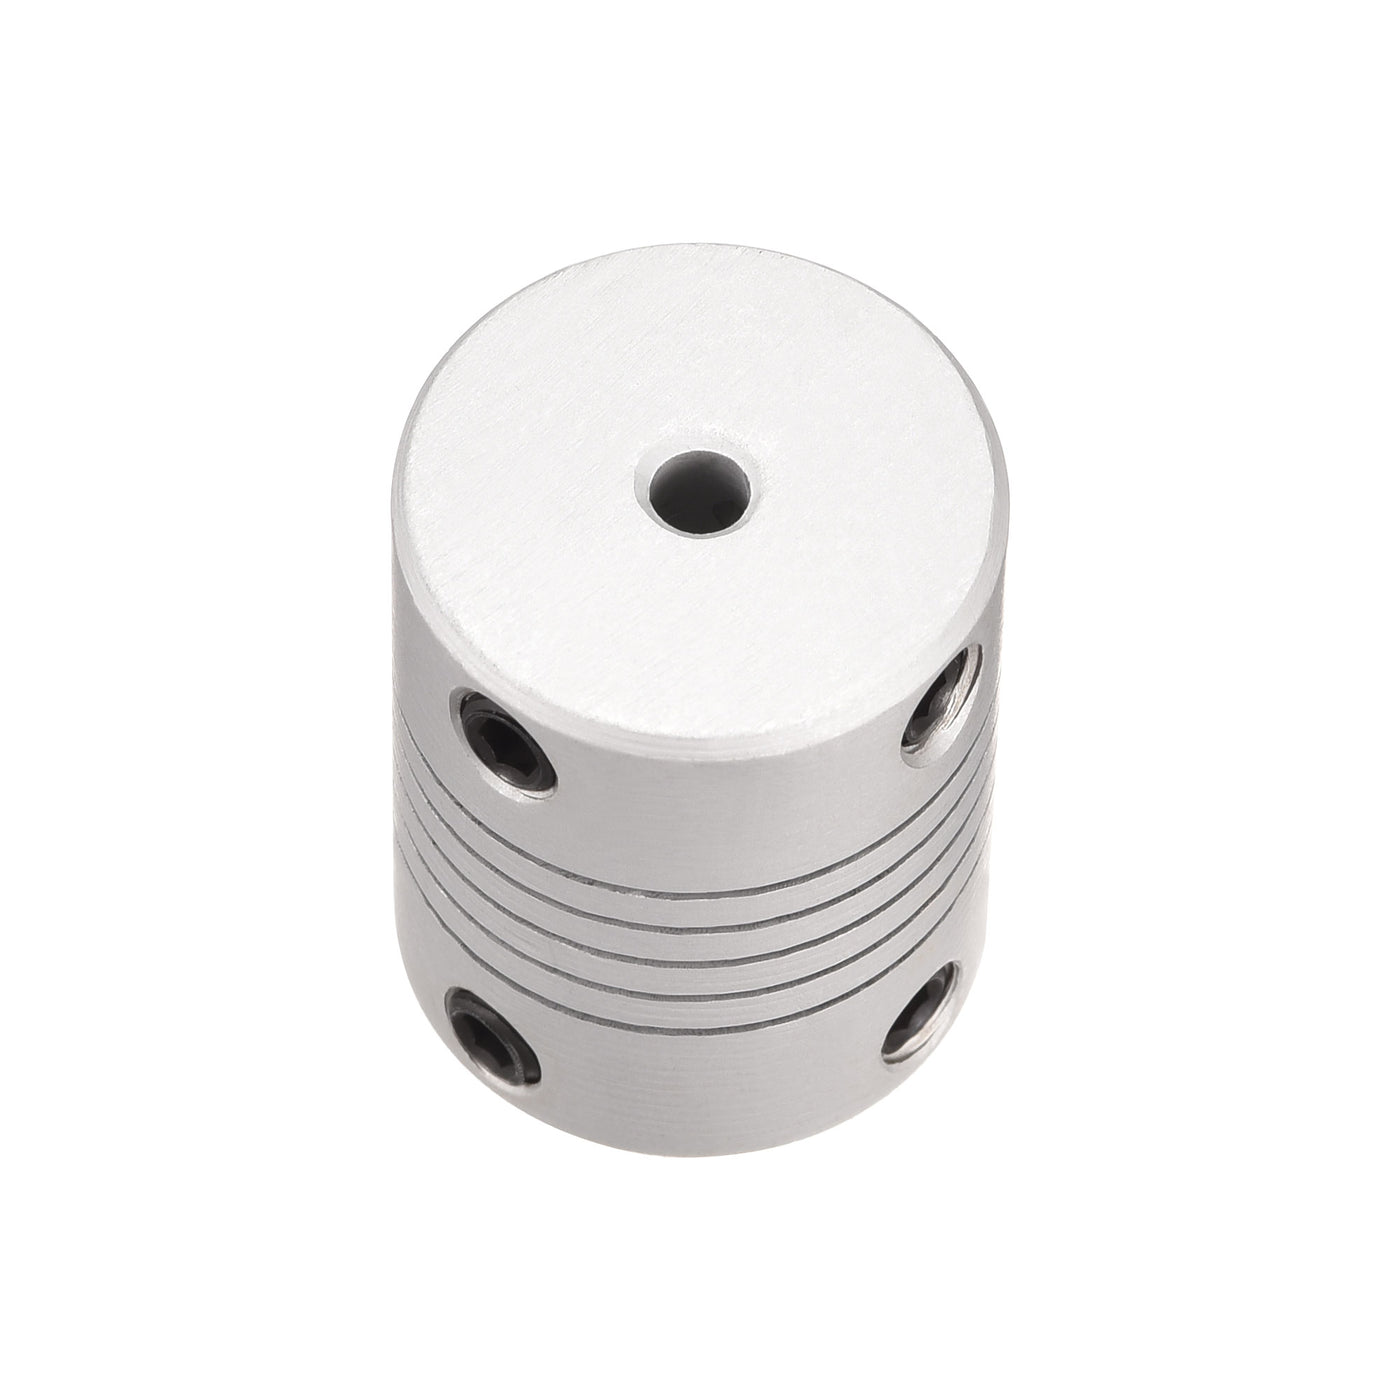 uxcell Uxcell 3mm to 3mm Aluminum Alloy Shaft Coupling Flexible Coupler L25xD19 Silver,5pcs